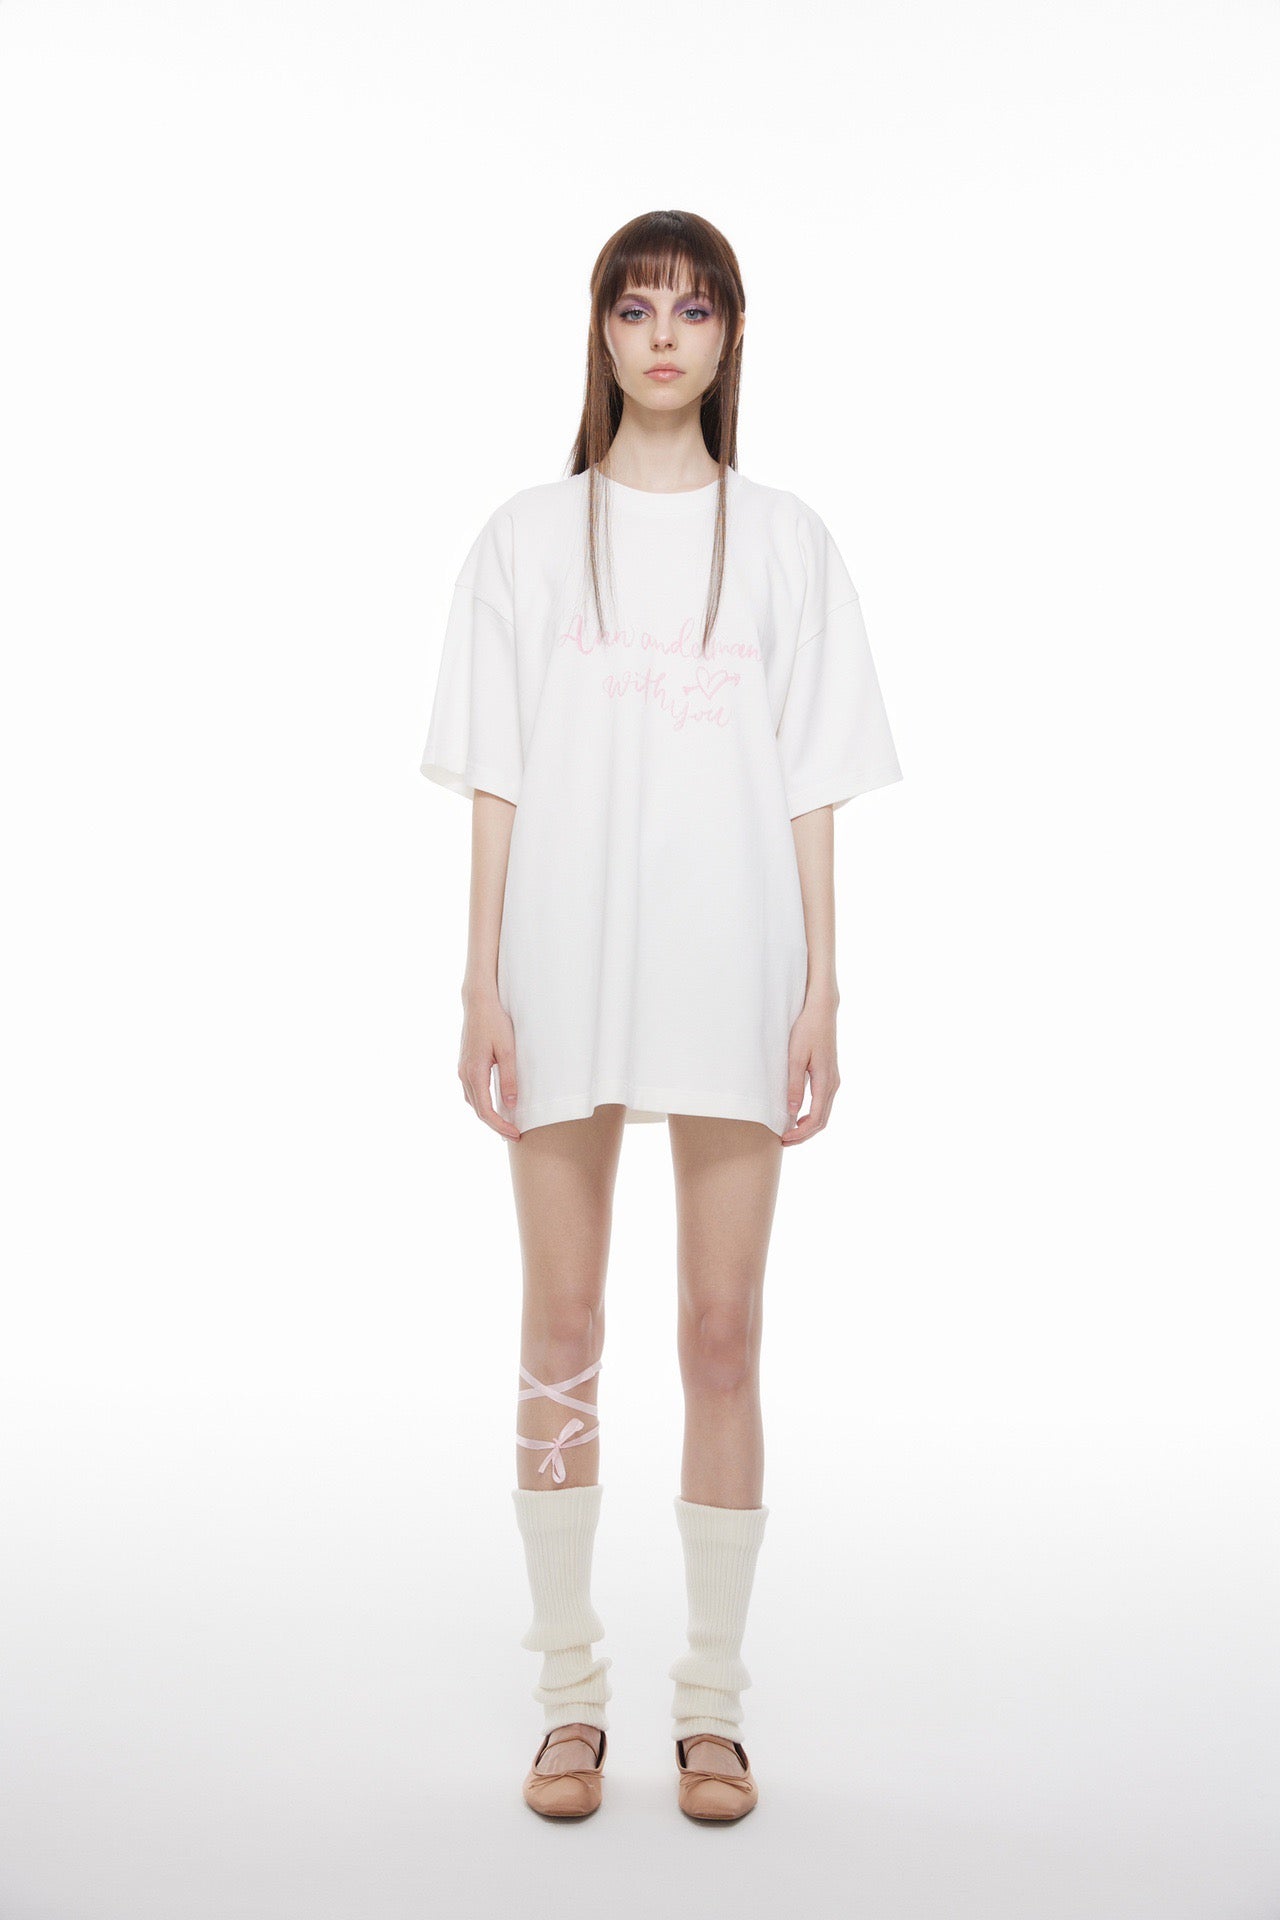 ANN ANDELMAN White 520 Limited OS Short Tee | MADA IN CHINA